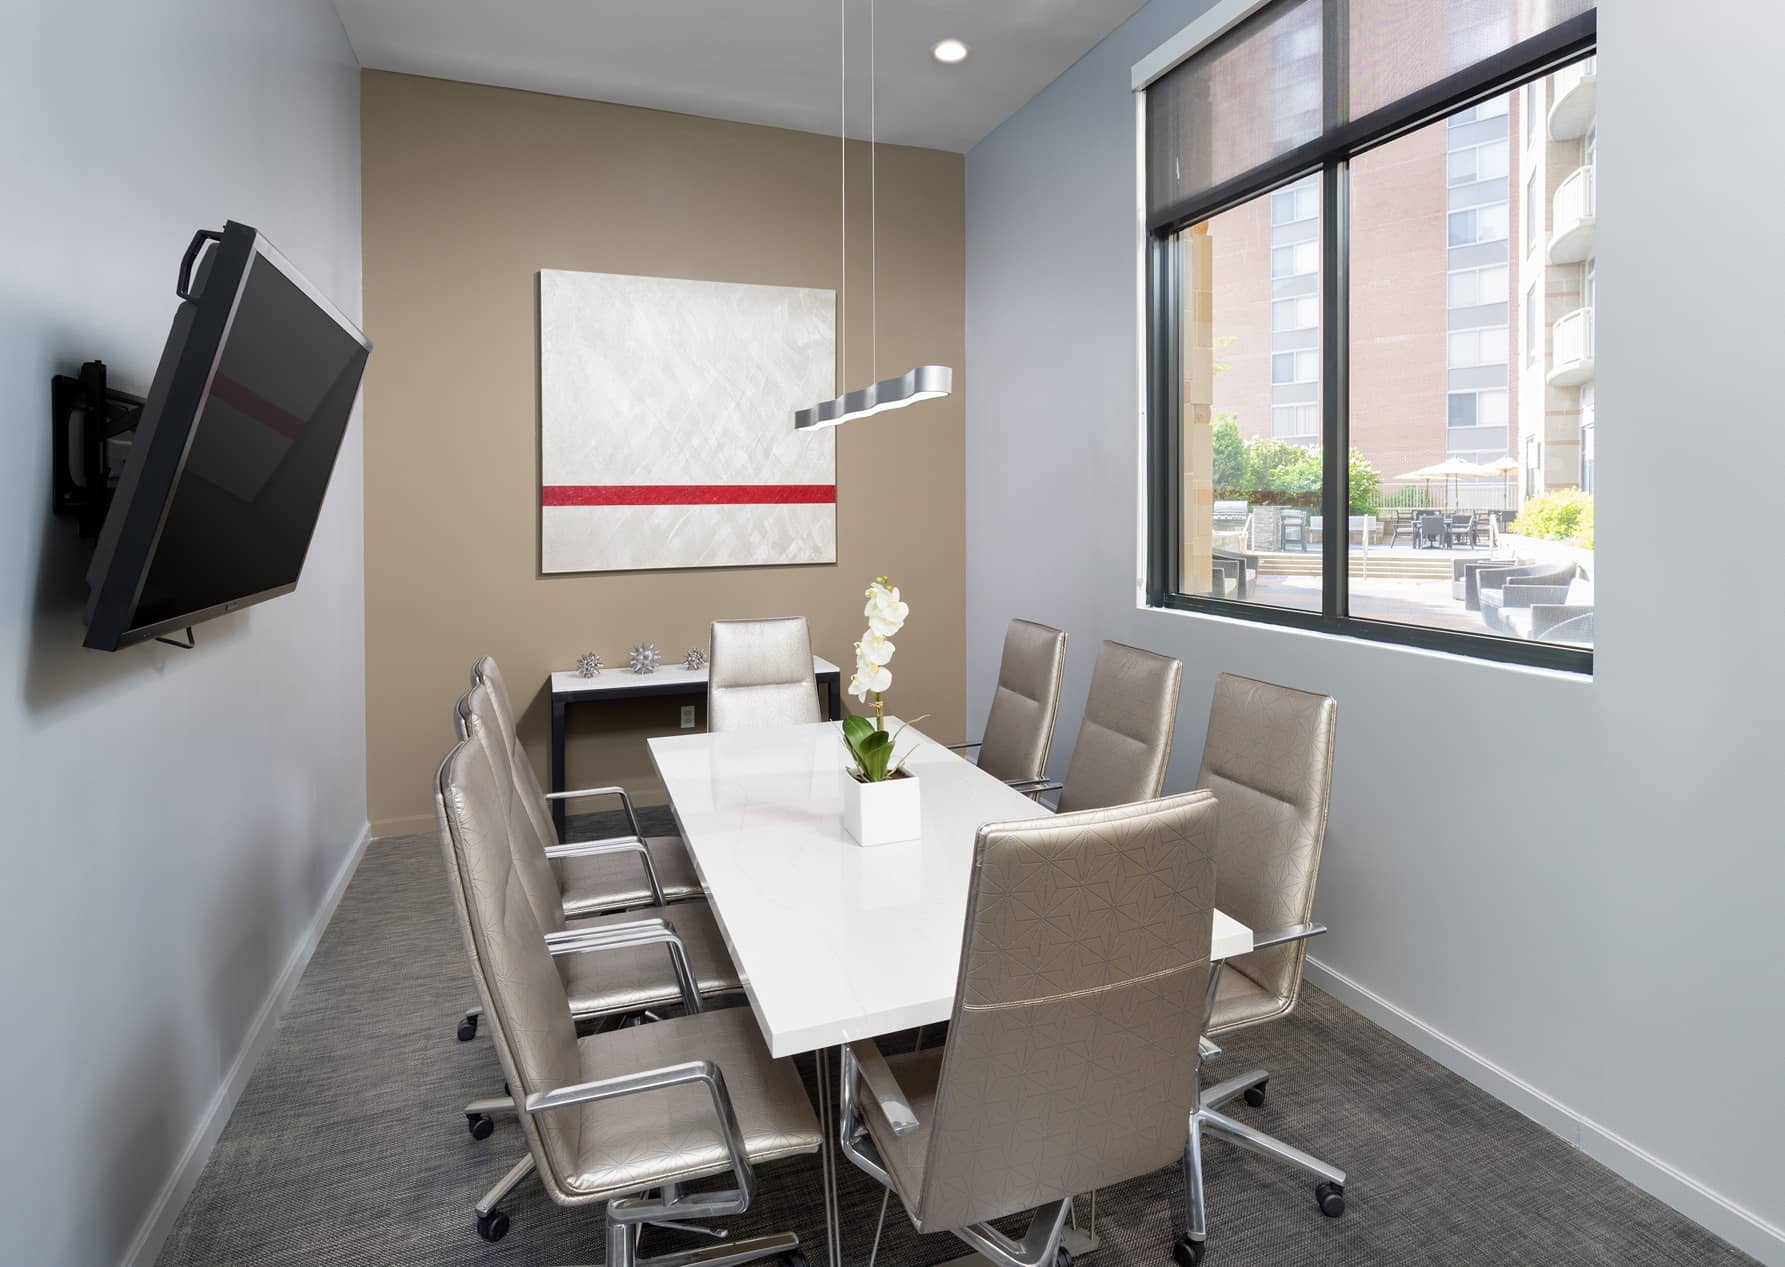 1200 East West Conference Room